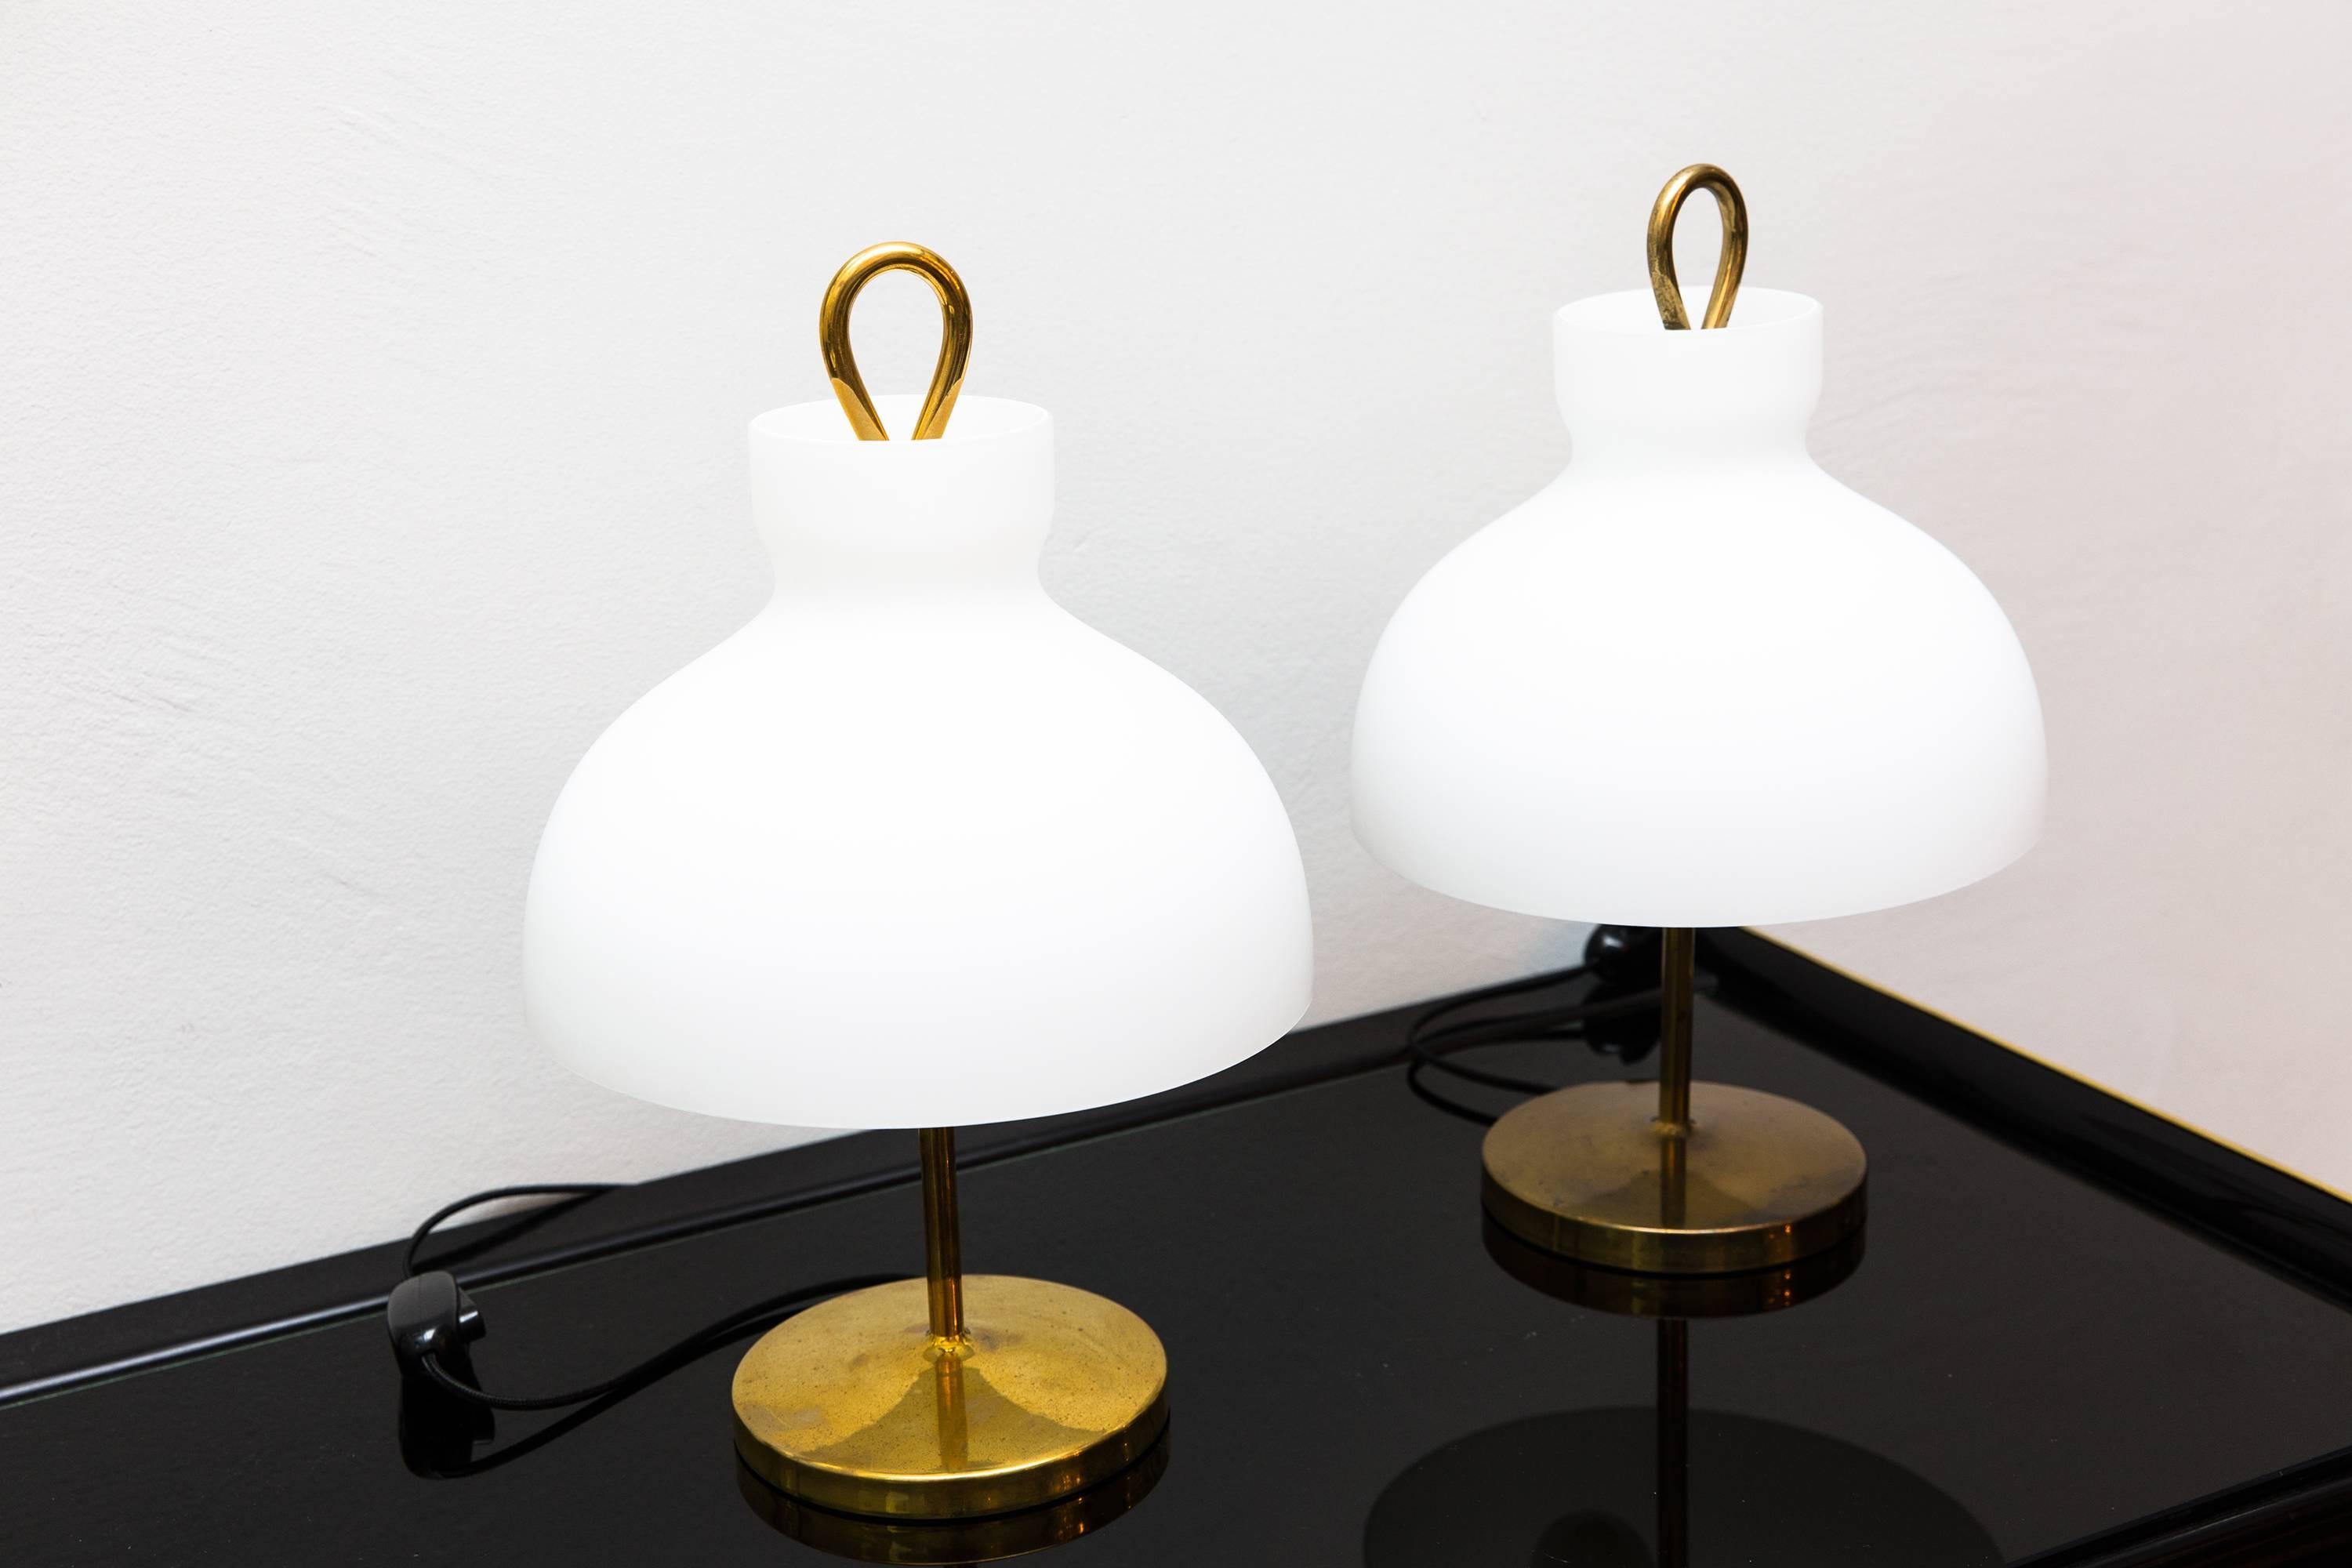 A pair of Ignazio Gardella Table Lamps, Prod. Azucena, Model Arenzano LTA 3, Italy circa 1956, bras, glass, three bulbs, height 35 cm, diameter 22 cm. Very good condition, no chips or scratches in the glass shades, brass with light patina.